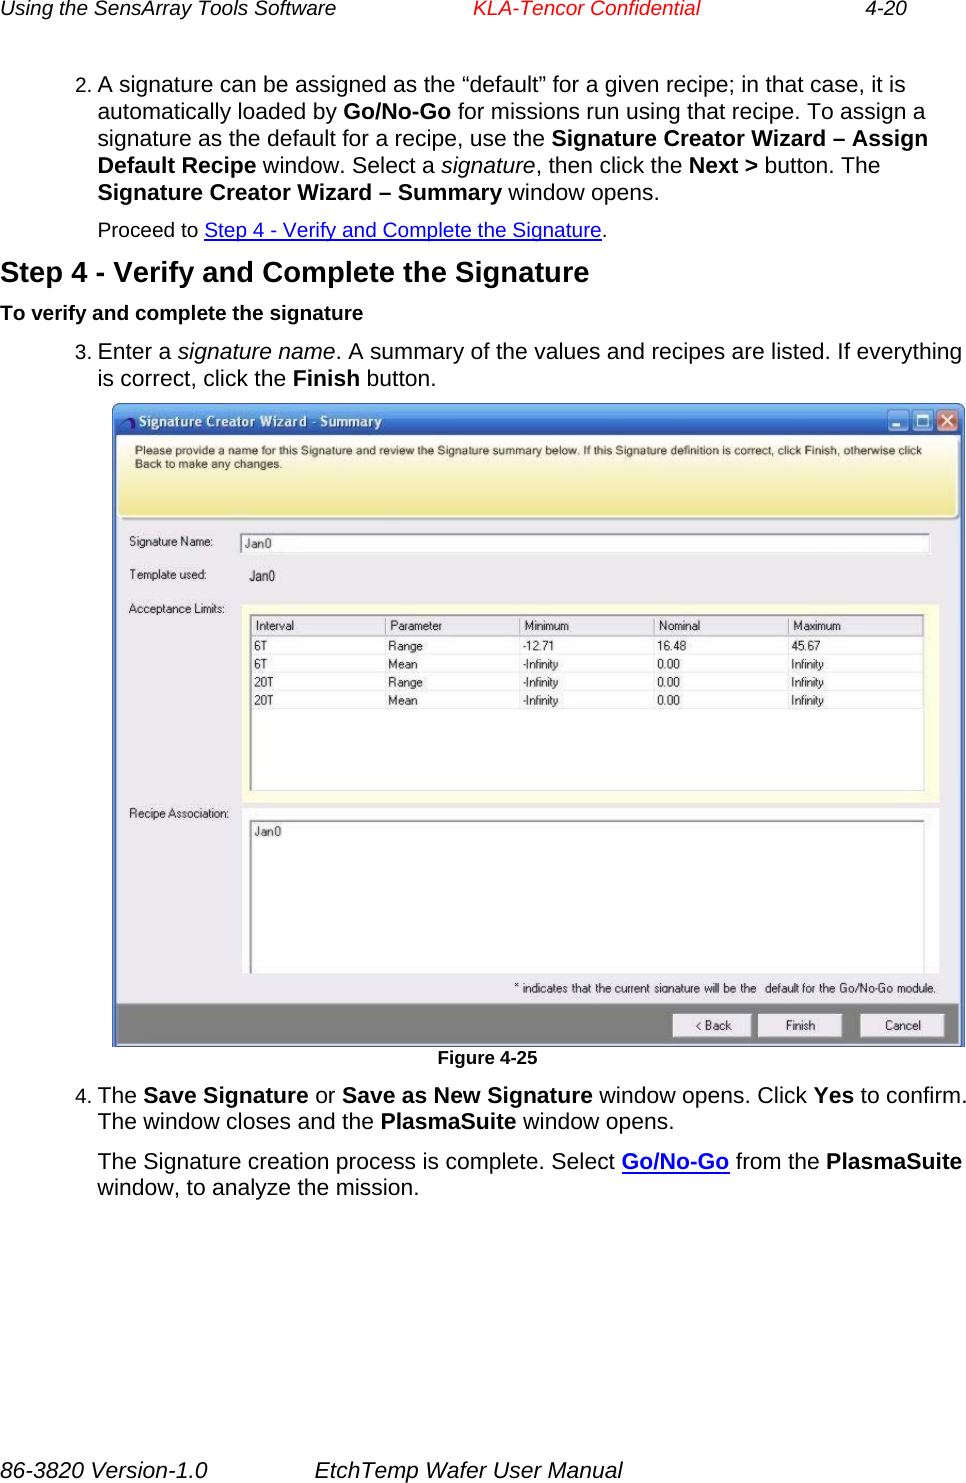 Using the SensArray Tools Software        KLA-Tencor Confidential             4-20 2. A signature can be assigned as the “default” for a given recipe; in that case, it is automatically loaded by Go/No-Go for missions run using that recipe. To assign a signature as the default for a recipe, use the Signature Creator Wizard – Assign Default Recipe window. Select a signature, then click the Next &gt; button. The Signature Creator Wizard – Summary window opens. Proceed to Step 4 - Verify and Complete the Signature. Step 4 - Verify and Complete the Signature To verify and complete the signature 3. Enter a signature name. A summary of the values and recipes are listed. If everything is correct, click the Finish button.  Figure 4-25 4. The Save Signature or Save as New Signature window opens. Click Yes to confirm. The window closes and the PlasmaSuite window opens. The Signature creation process is complete. Select Go/No-Go from the PlasmaSuite window, to analyze the mission. 86-3820 Version-1.0  EtchTemp Wafer User Manual 